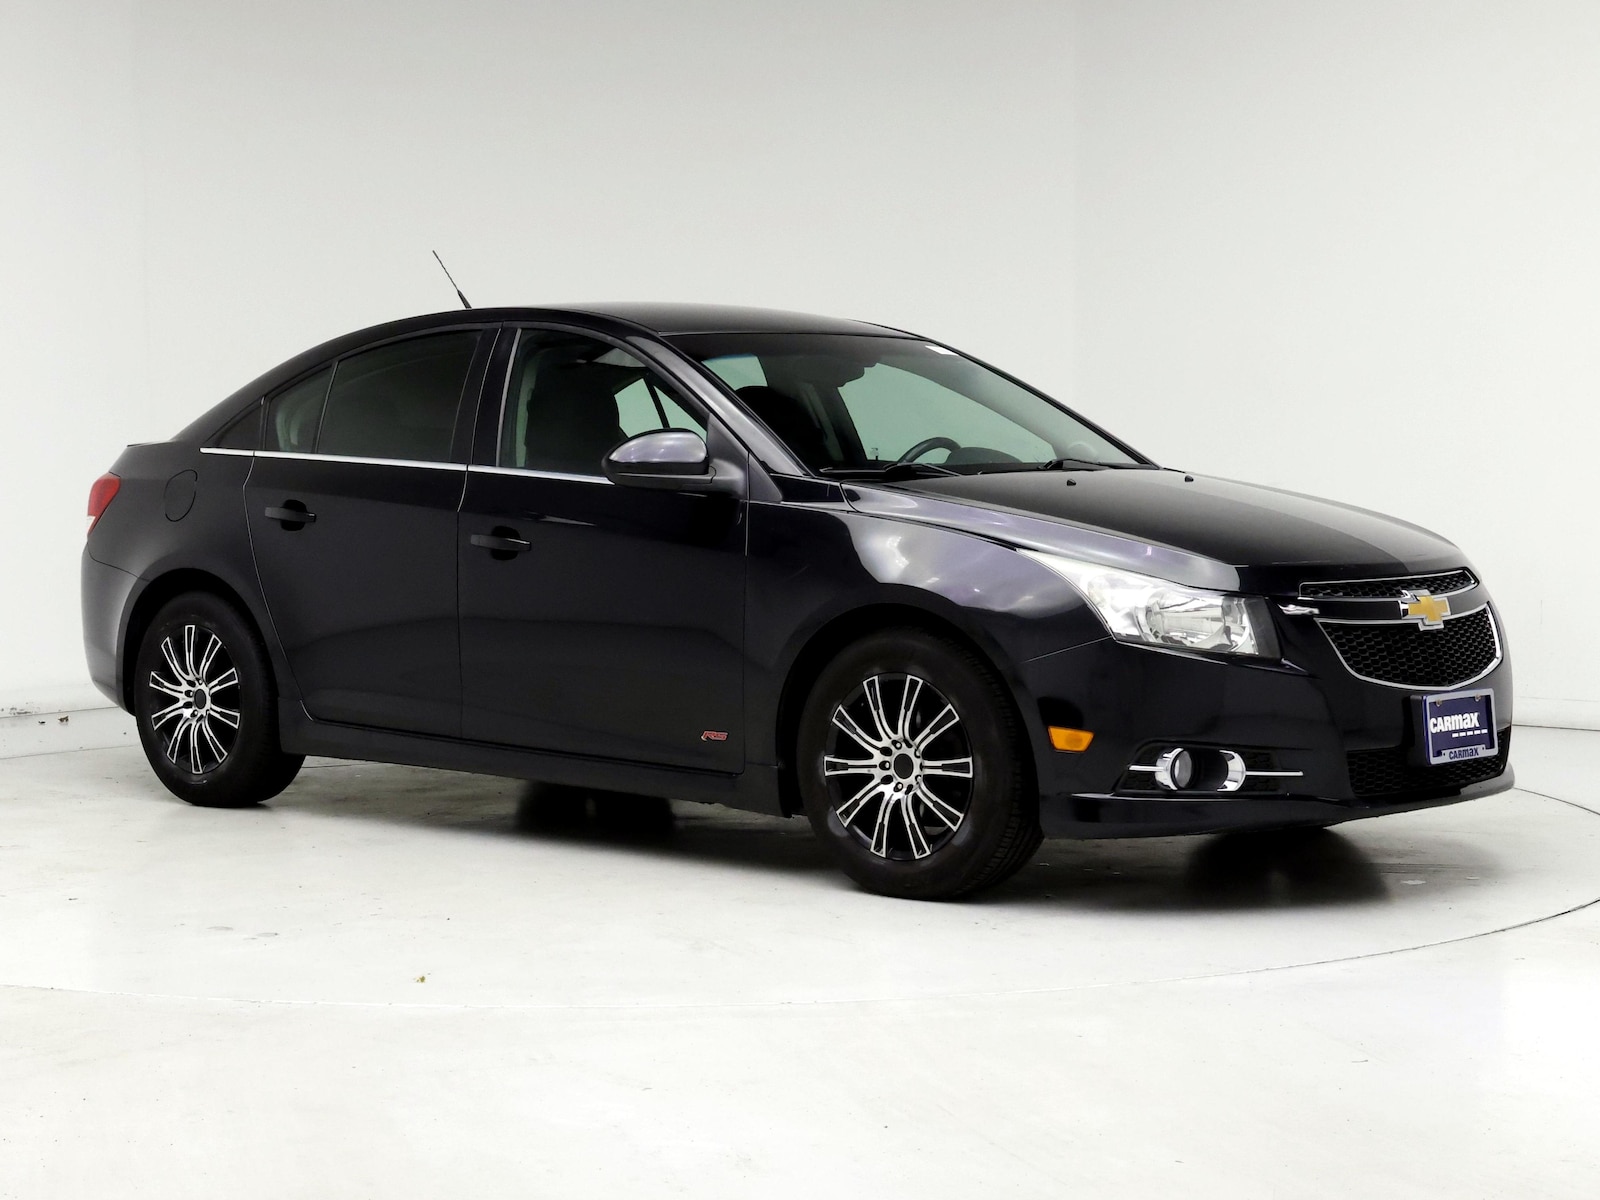 Used 2013 Chevrolet Cruze 1LT with VIN 1G1PD5SB9D7218068 for sale in Spokane Valley, WA